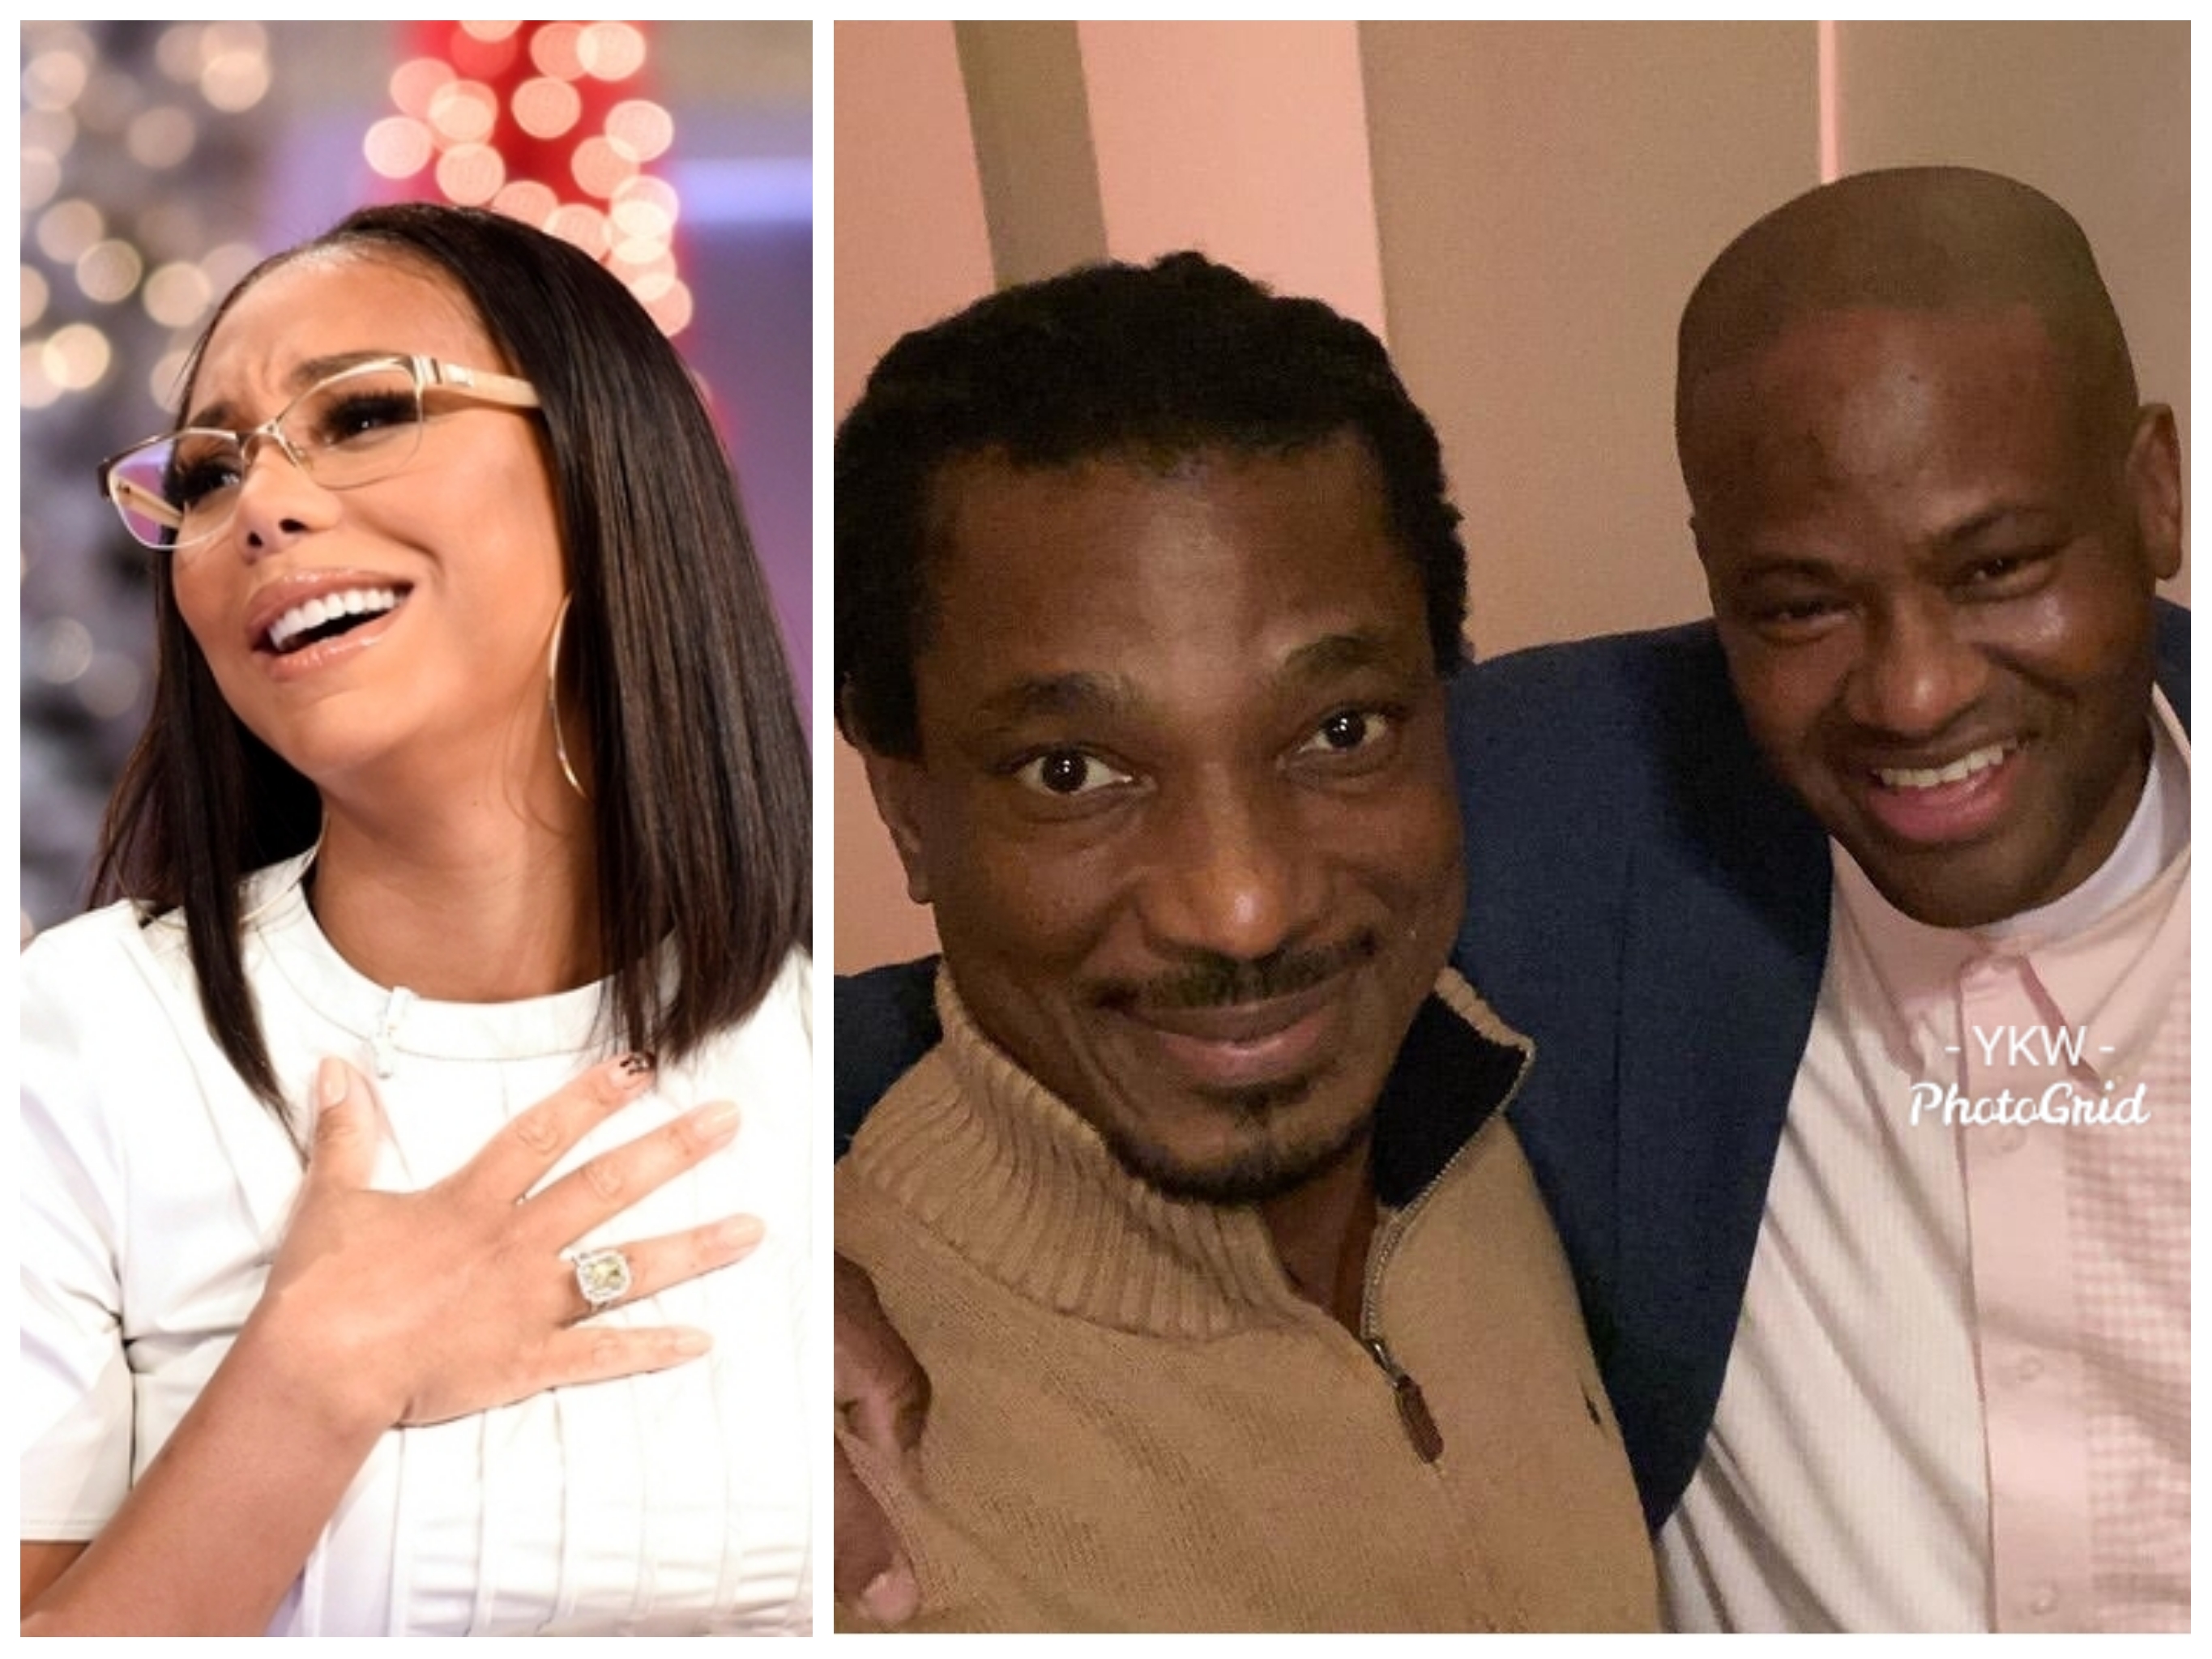 “2 Good Men:” Tamar Braxton’s Response To Her Boyfriend And Ex-Husband Hanging Out